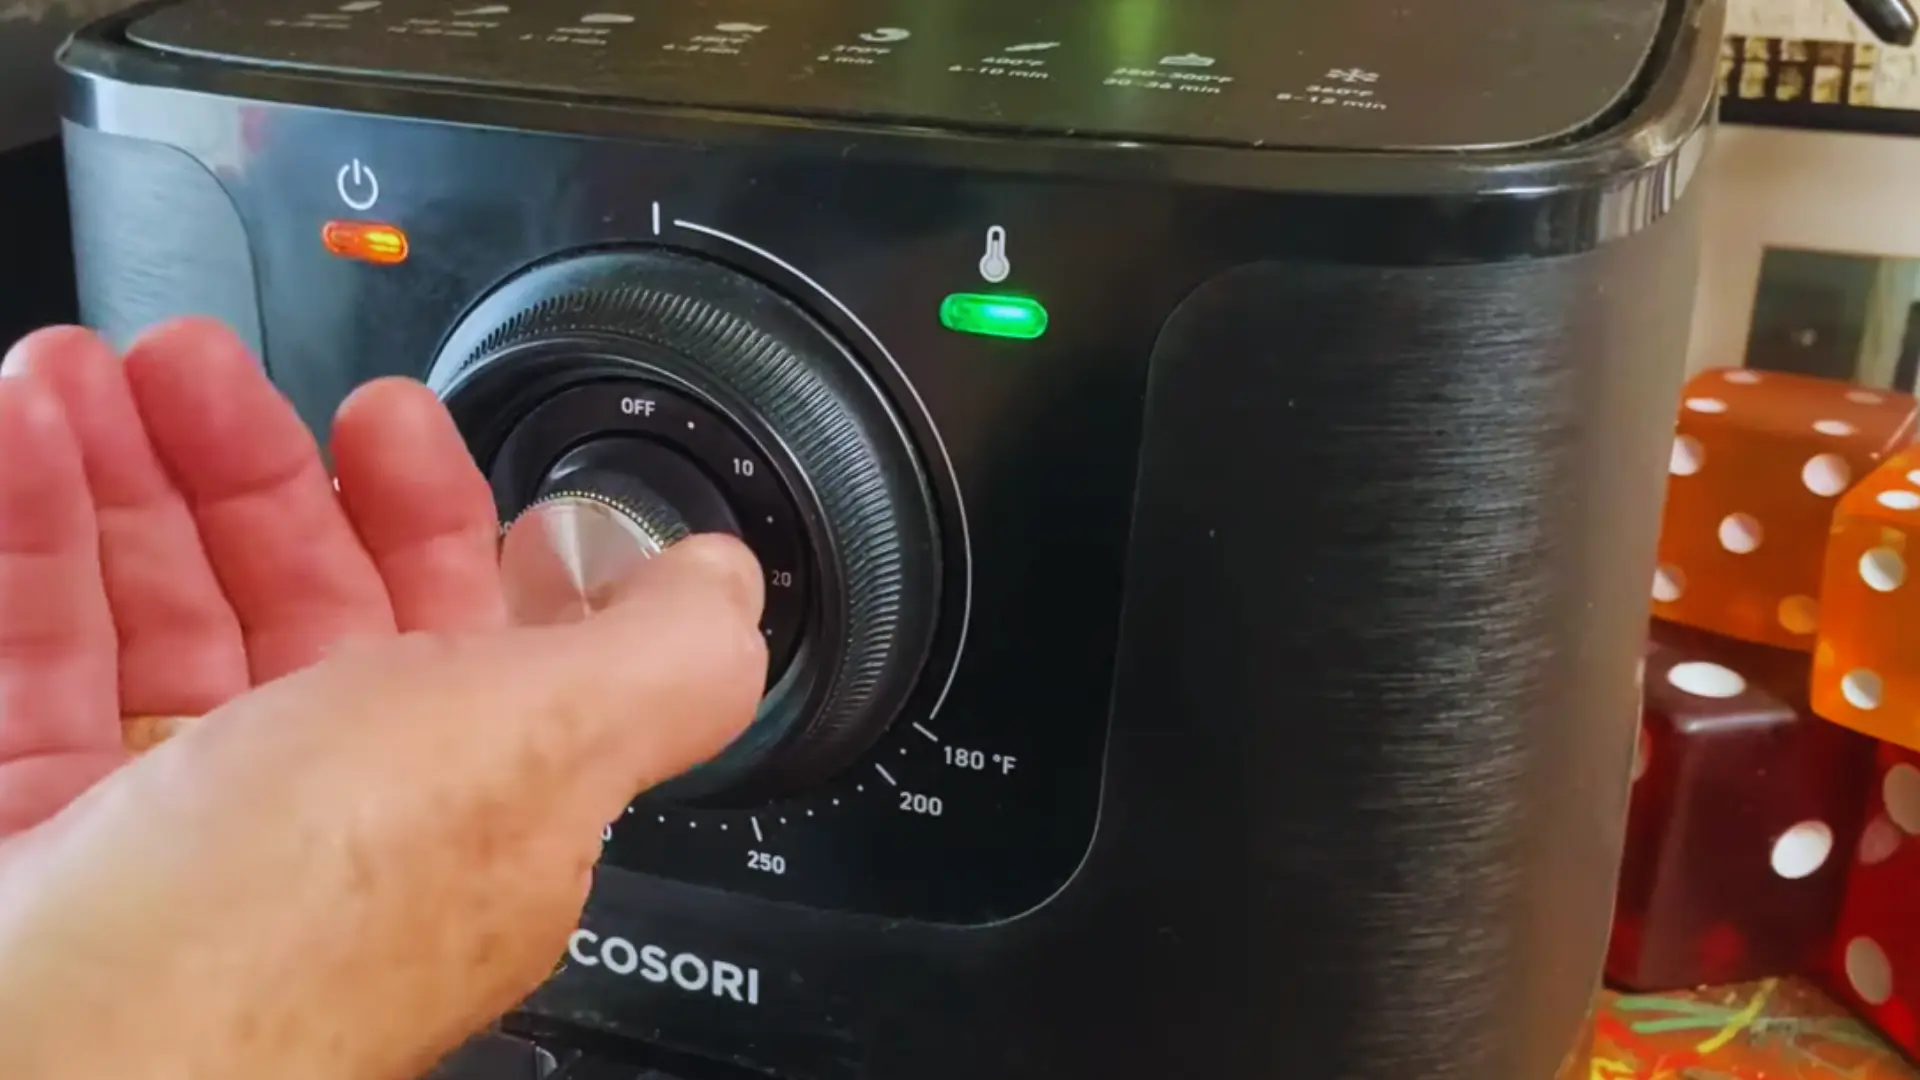 How do I reset my Cosori air fryer